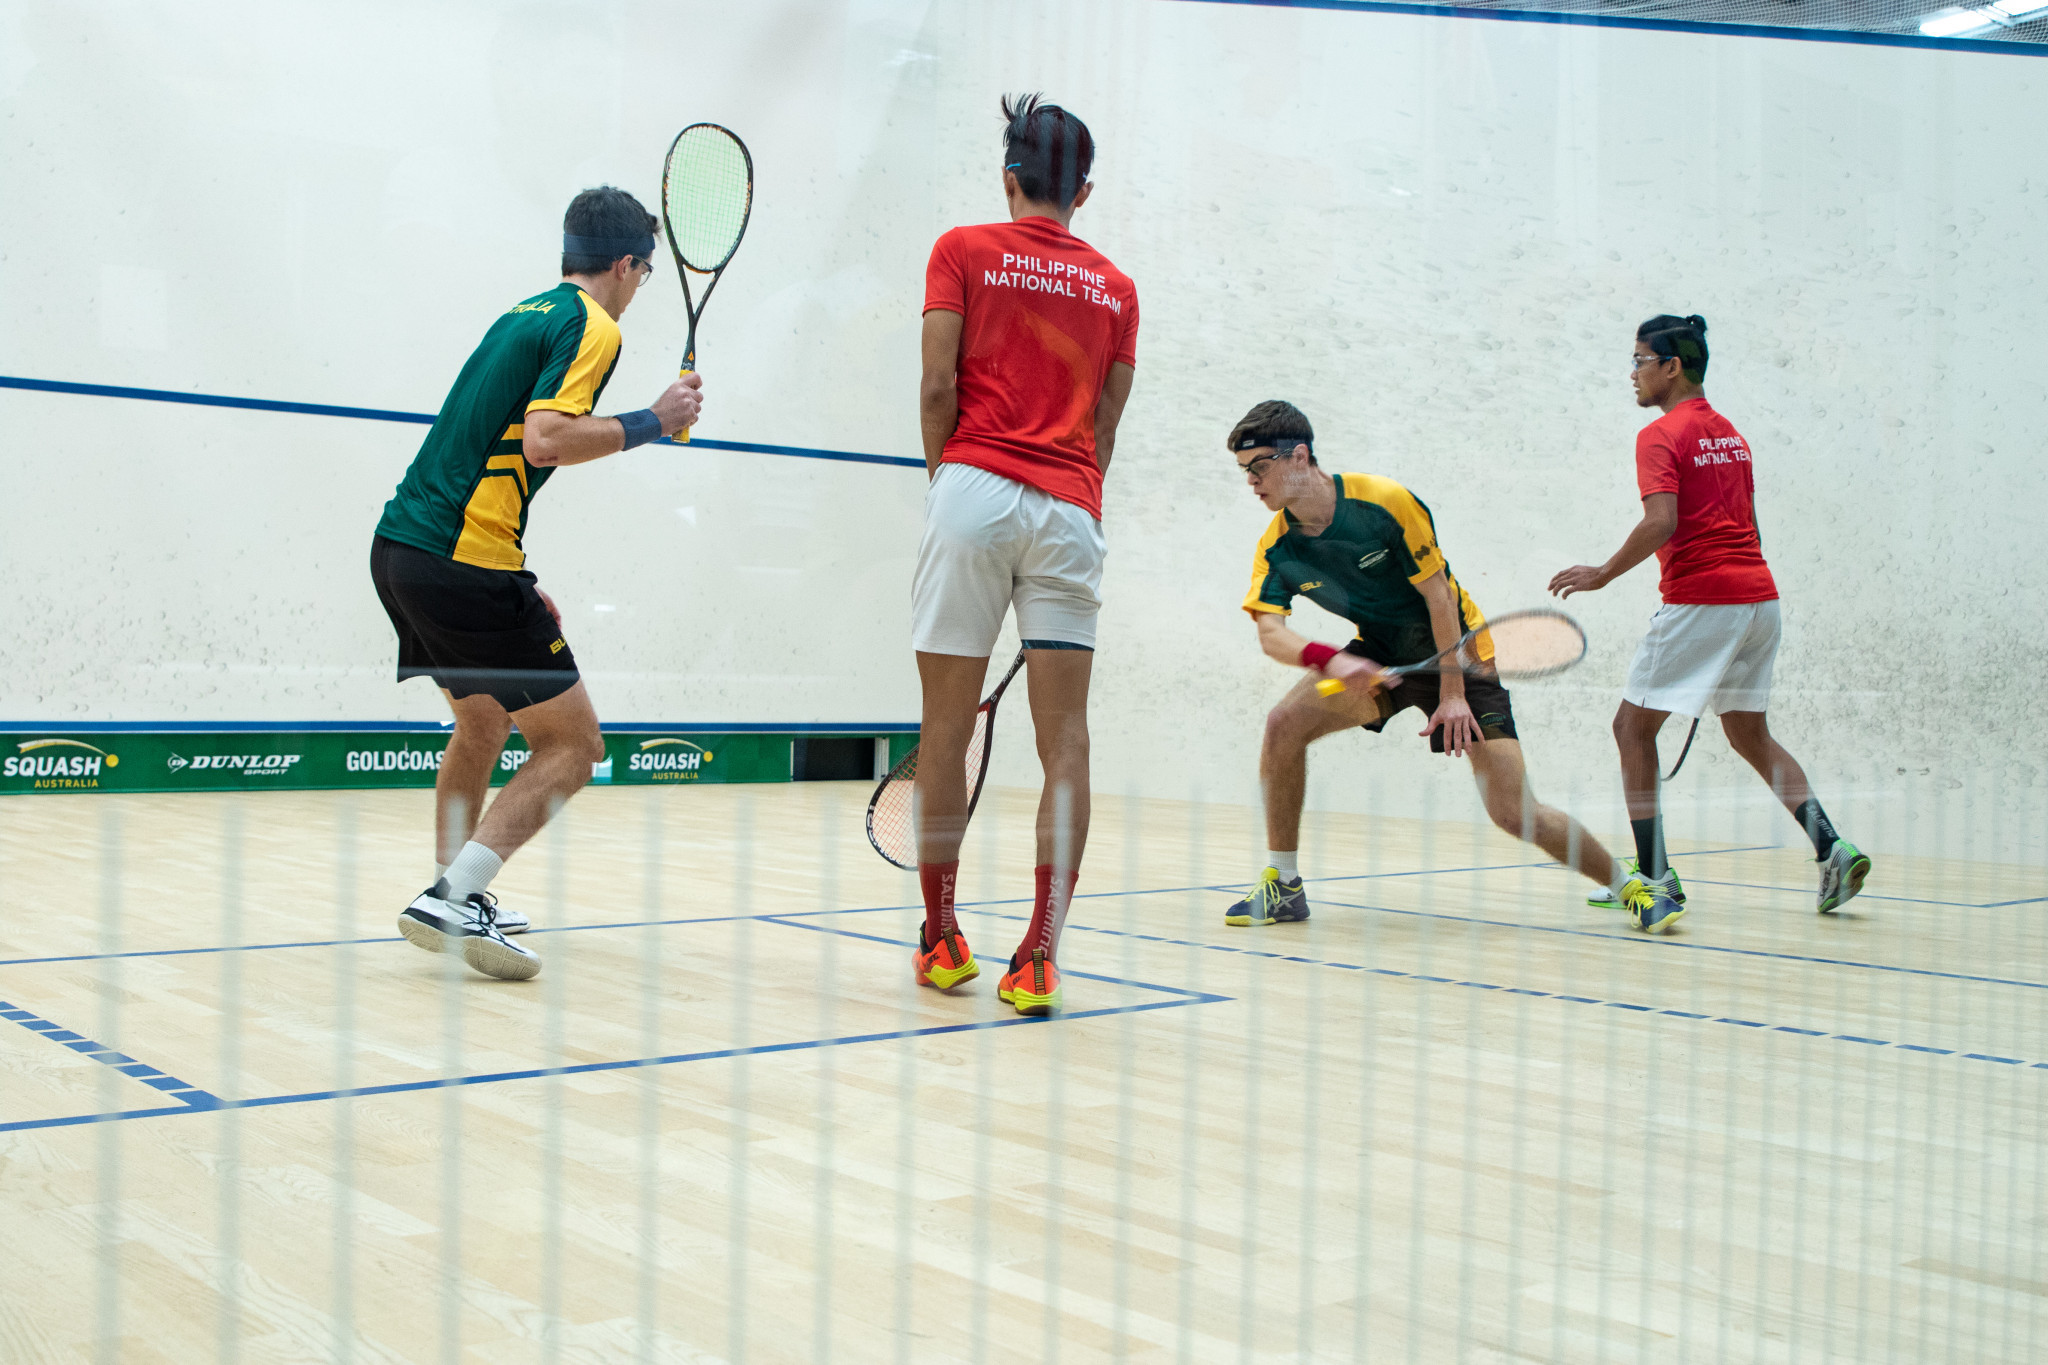 Brothers Nicholas and Thomas Calvert won their men's doubles clash against Malaysia's Darren Chan and Bryan Lim ©WSF